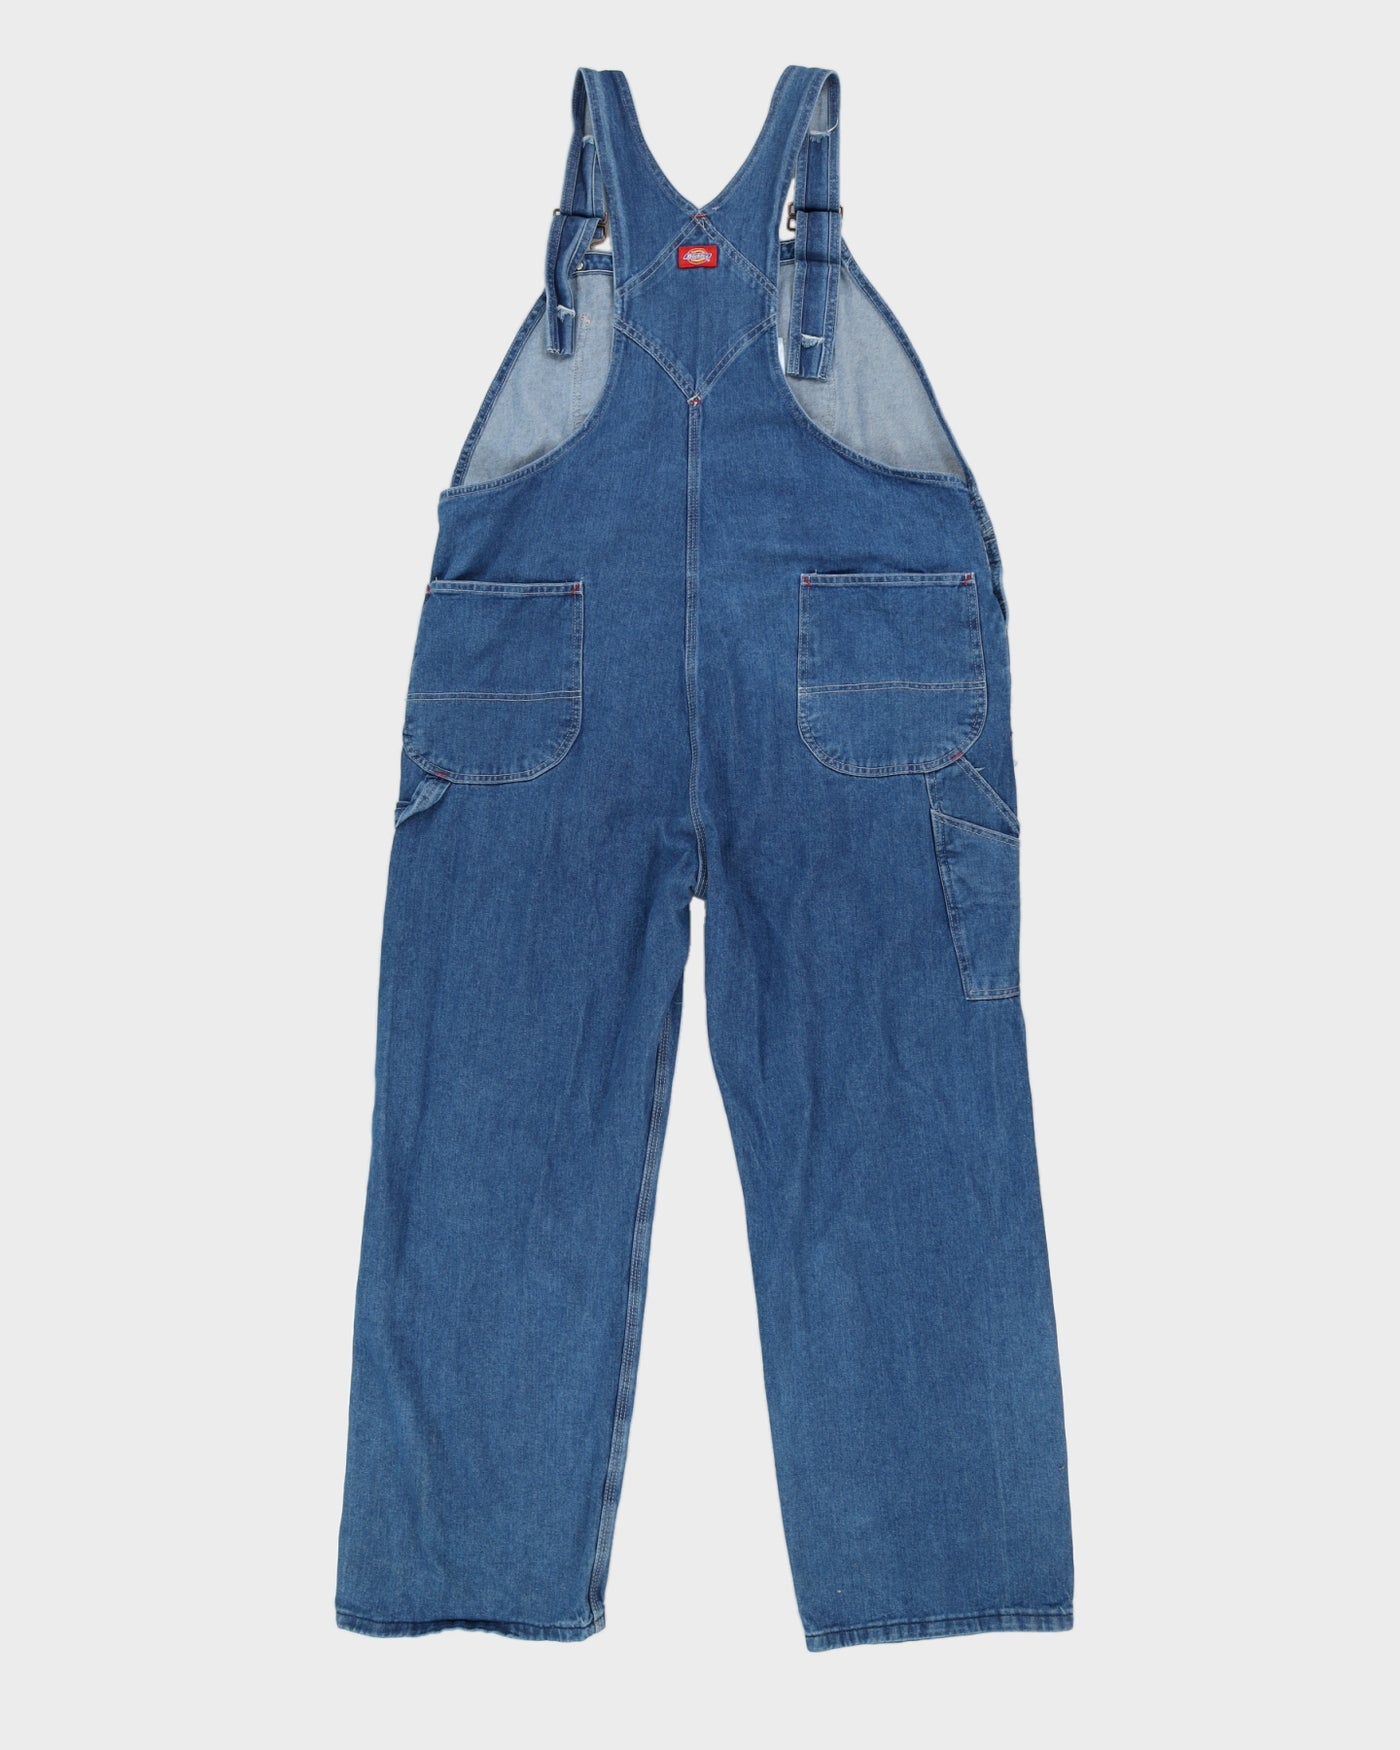 Dickies Blue Dungarees - W42 L32